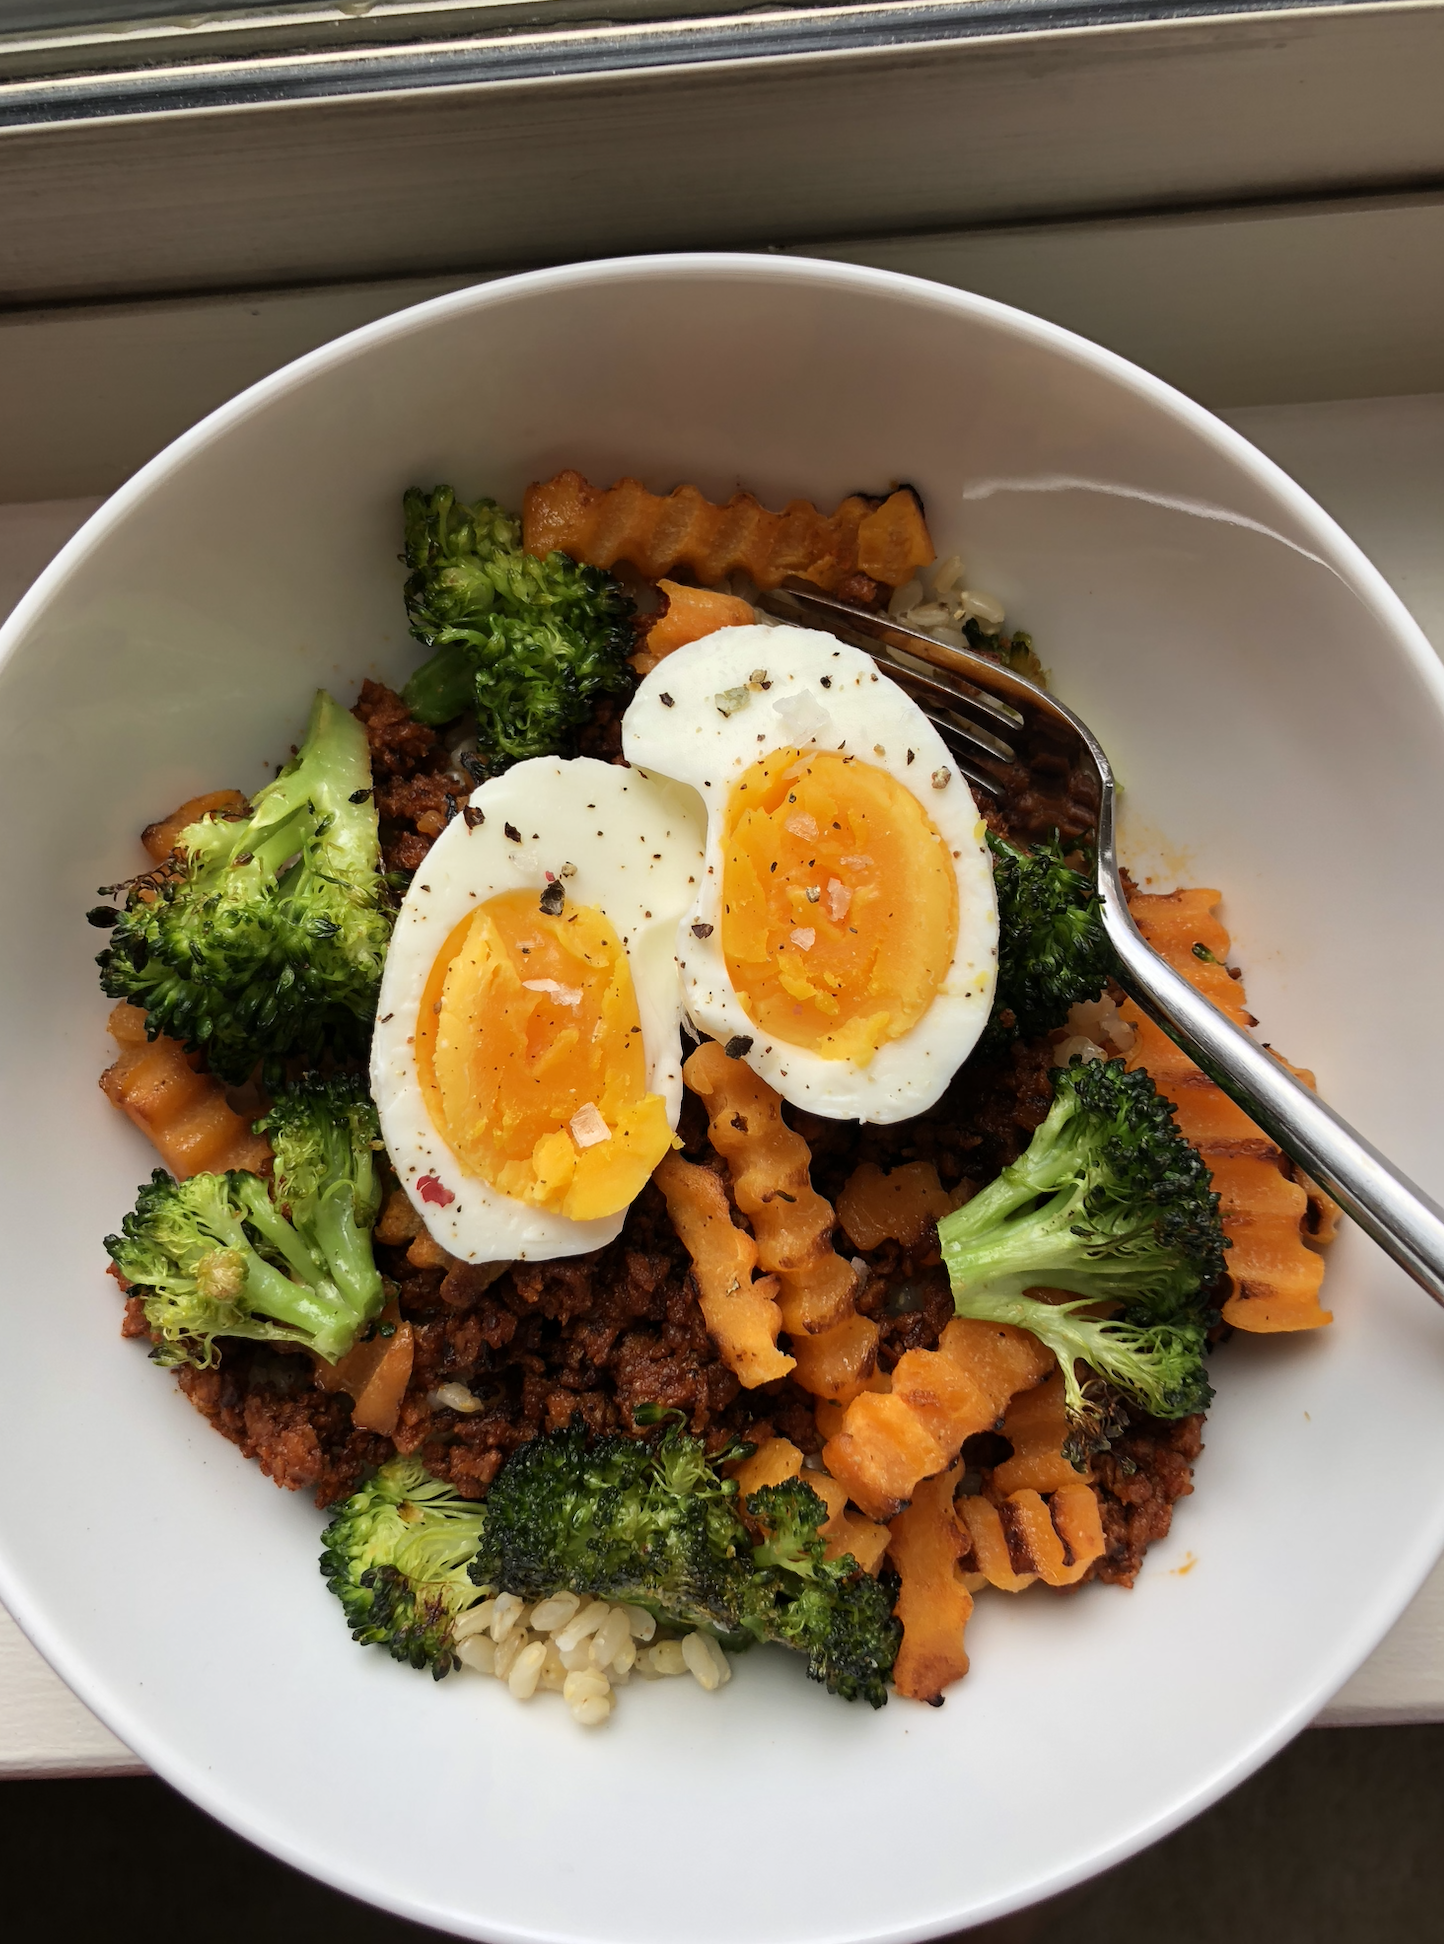 Bowl of food with quinoa, roasted broccoli, wavy-cut sweet potatoes, topped with a soft-boiled egg